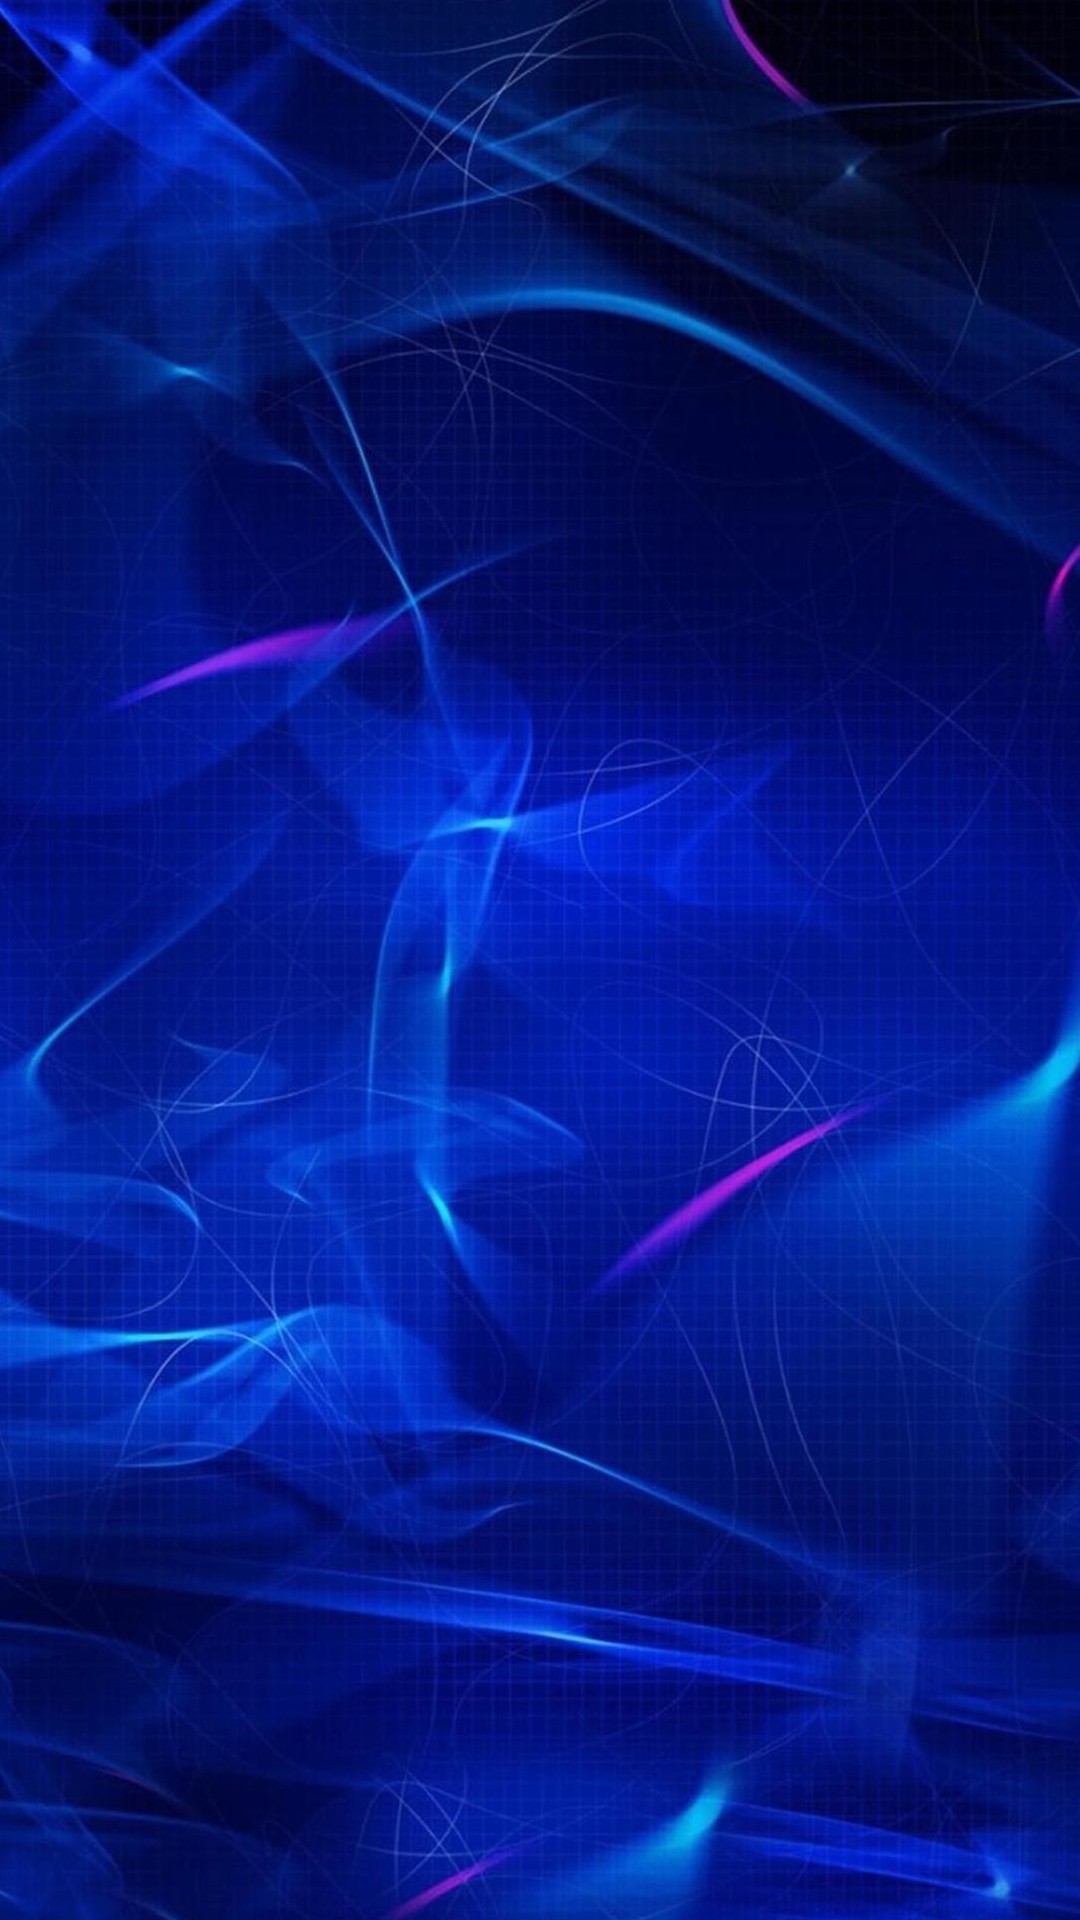 Abstract Xperia Z Wallpapers Hd 177 Xperia Z1 Zl Wallpapers And Backgrounds Iphone11 スマホ壁紙 待受画像ギャラリー